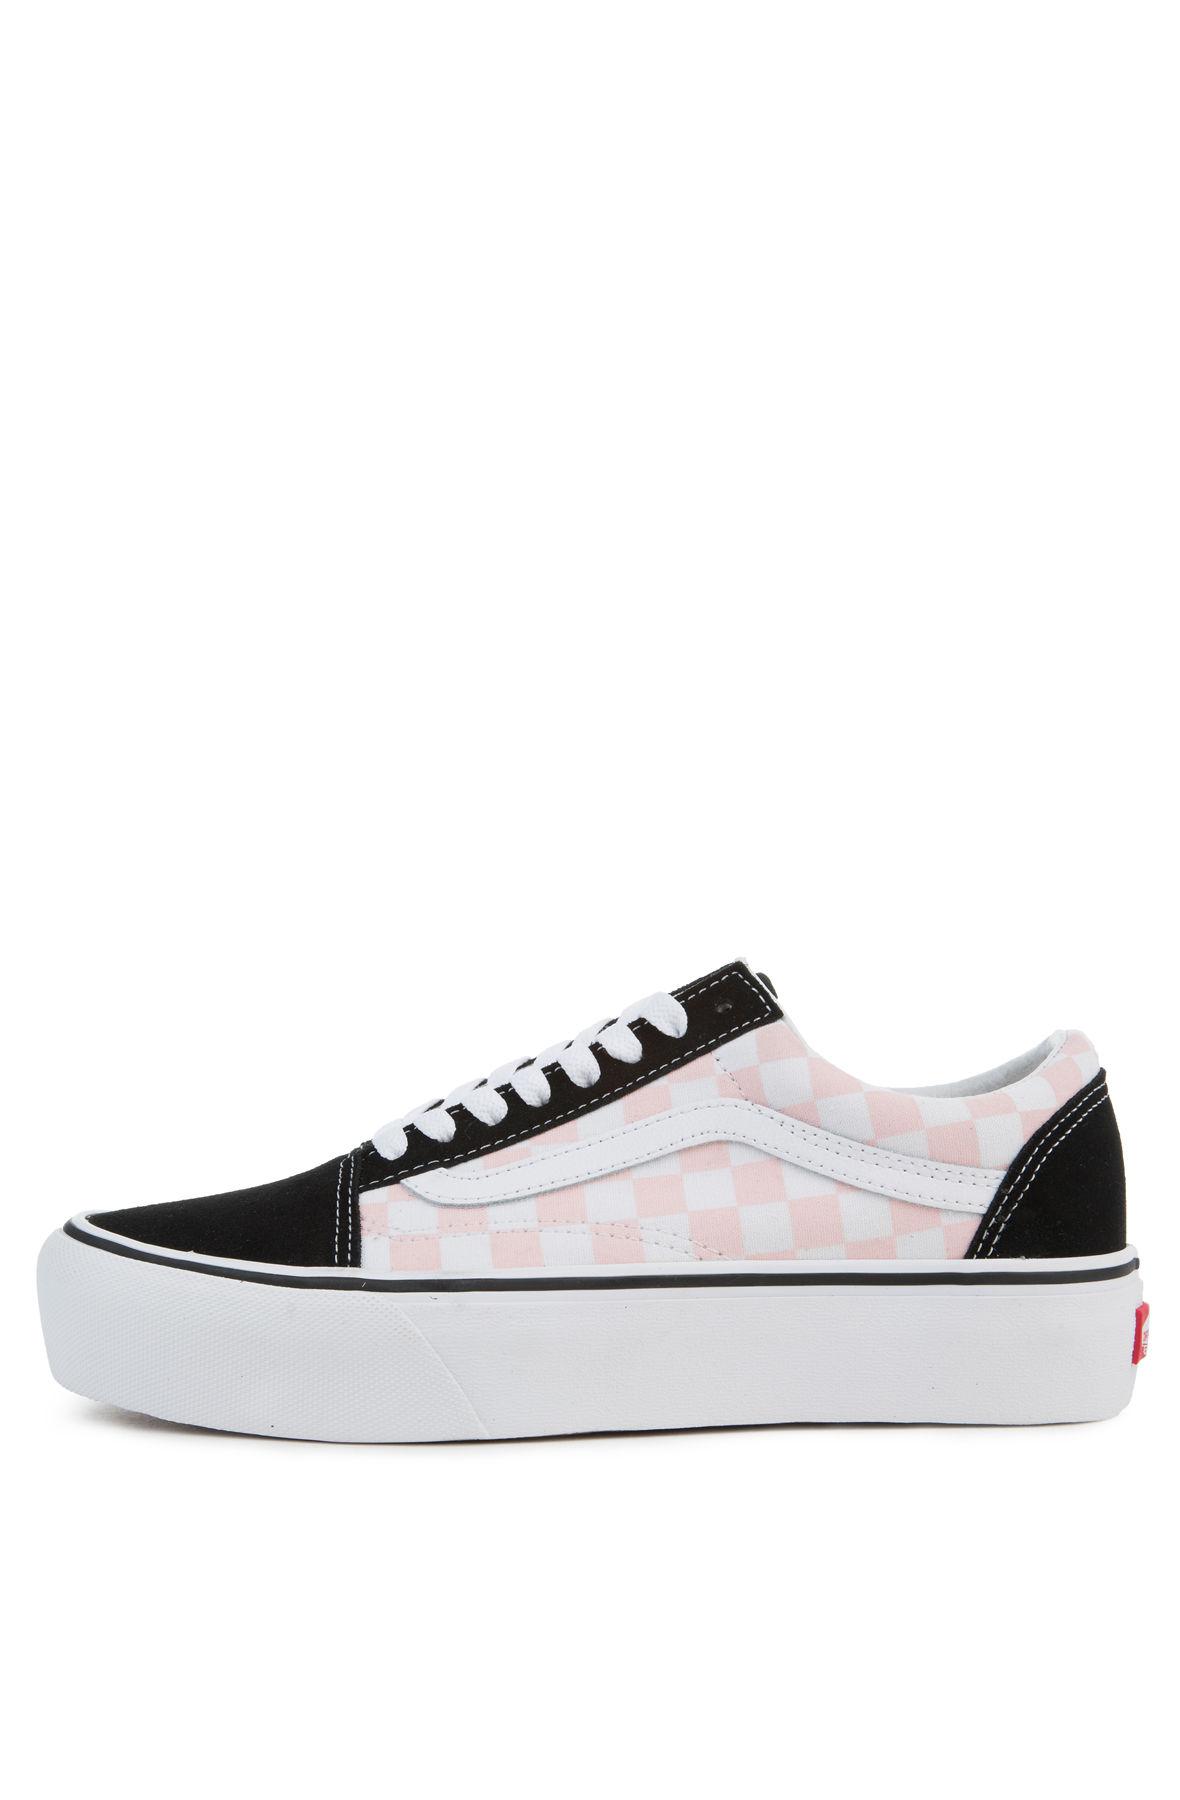 black white and pink checkered vans